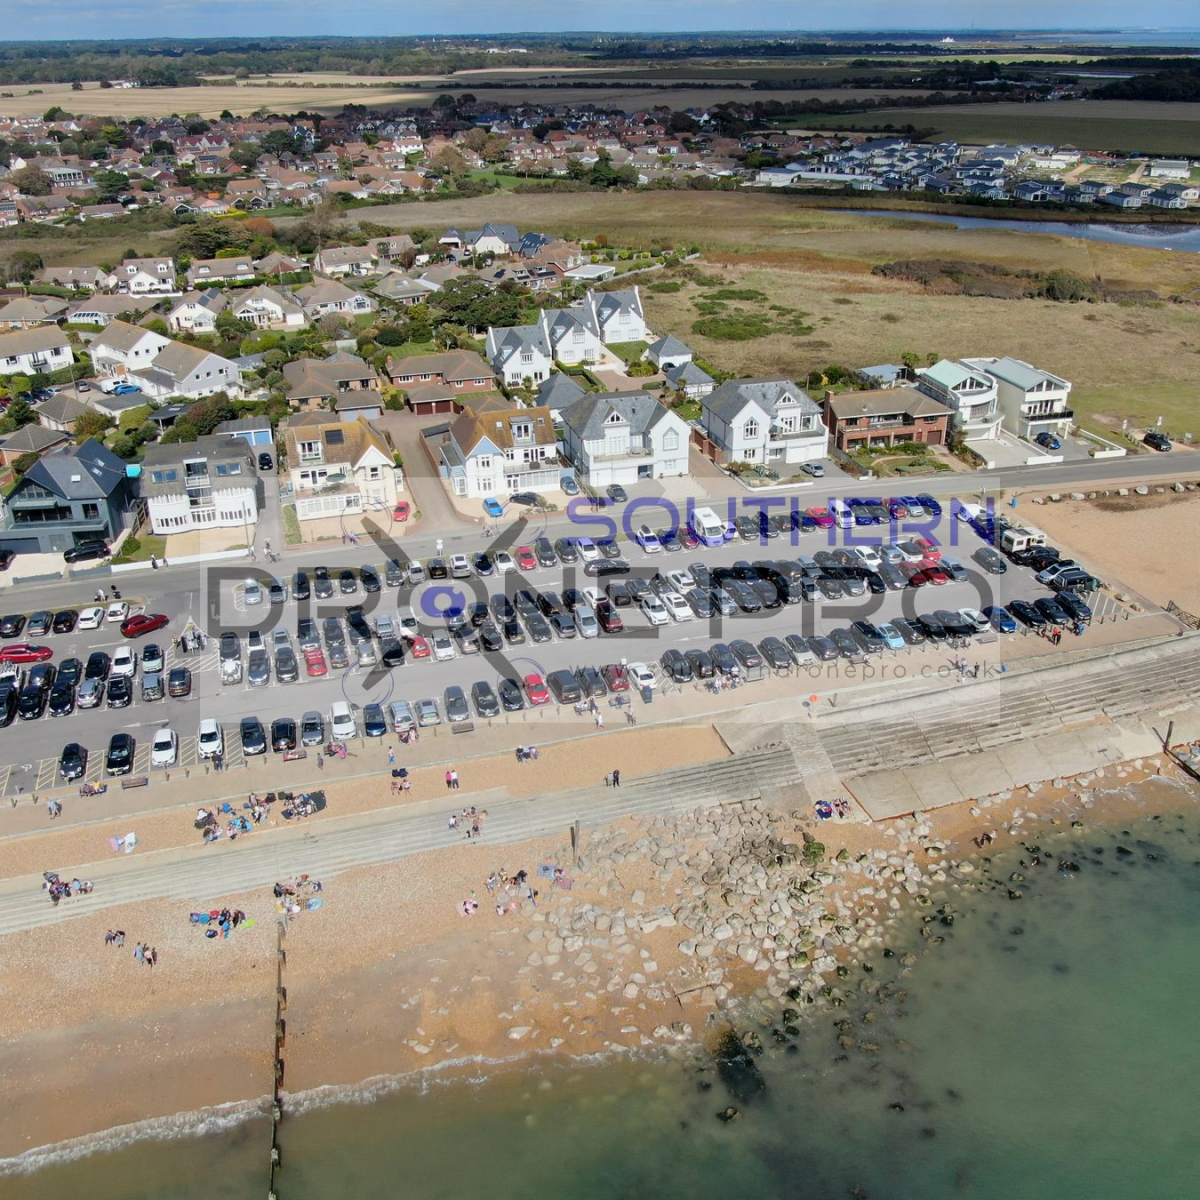 Milford on Sea SouthernDronePro